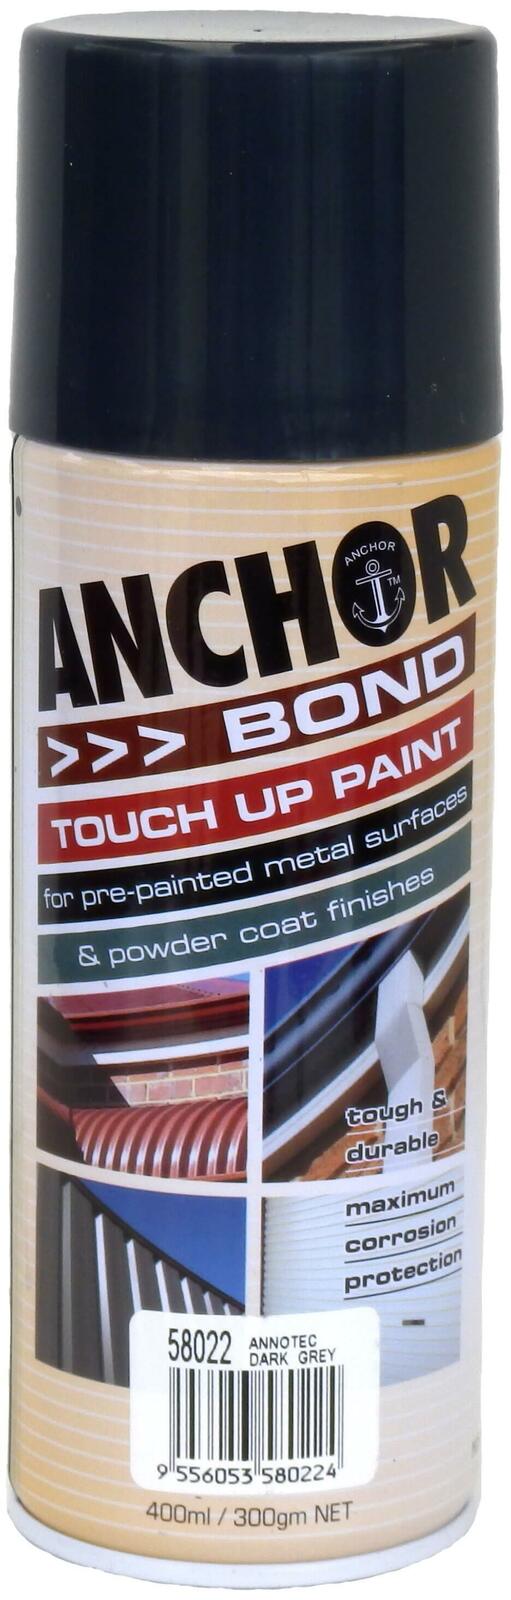 Touch up Paint